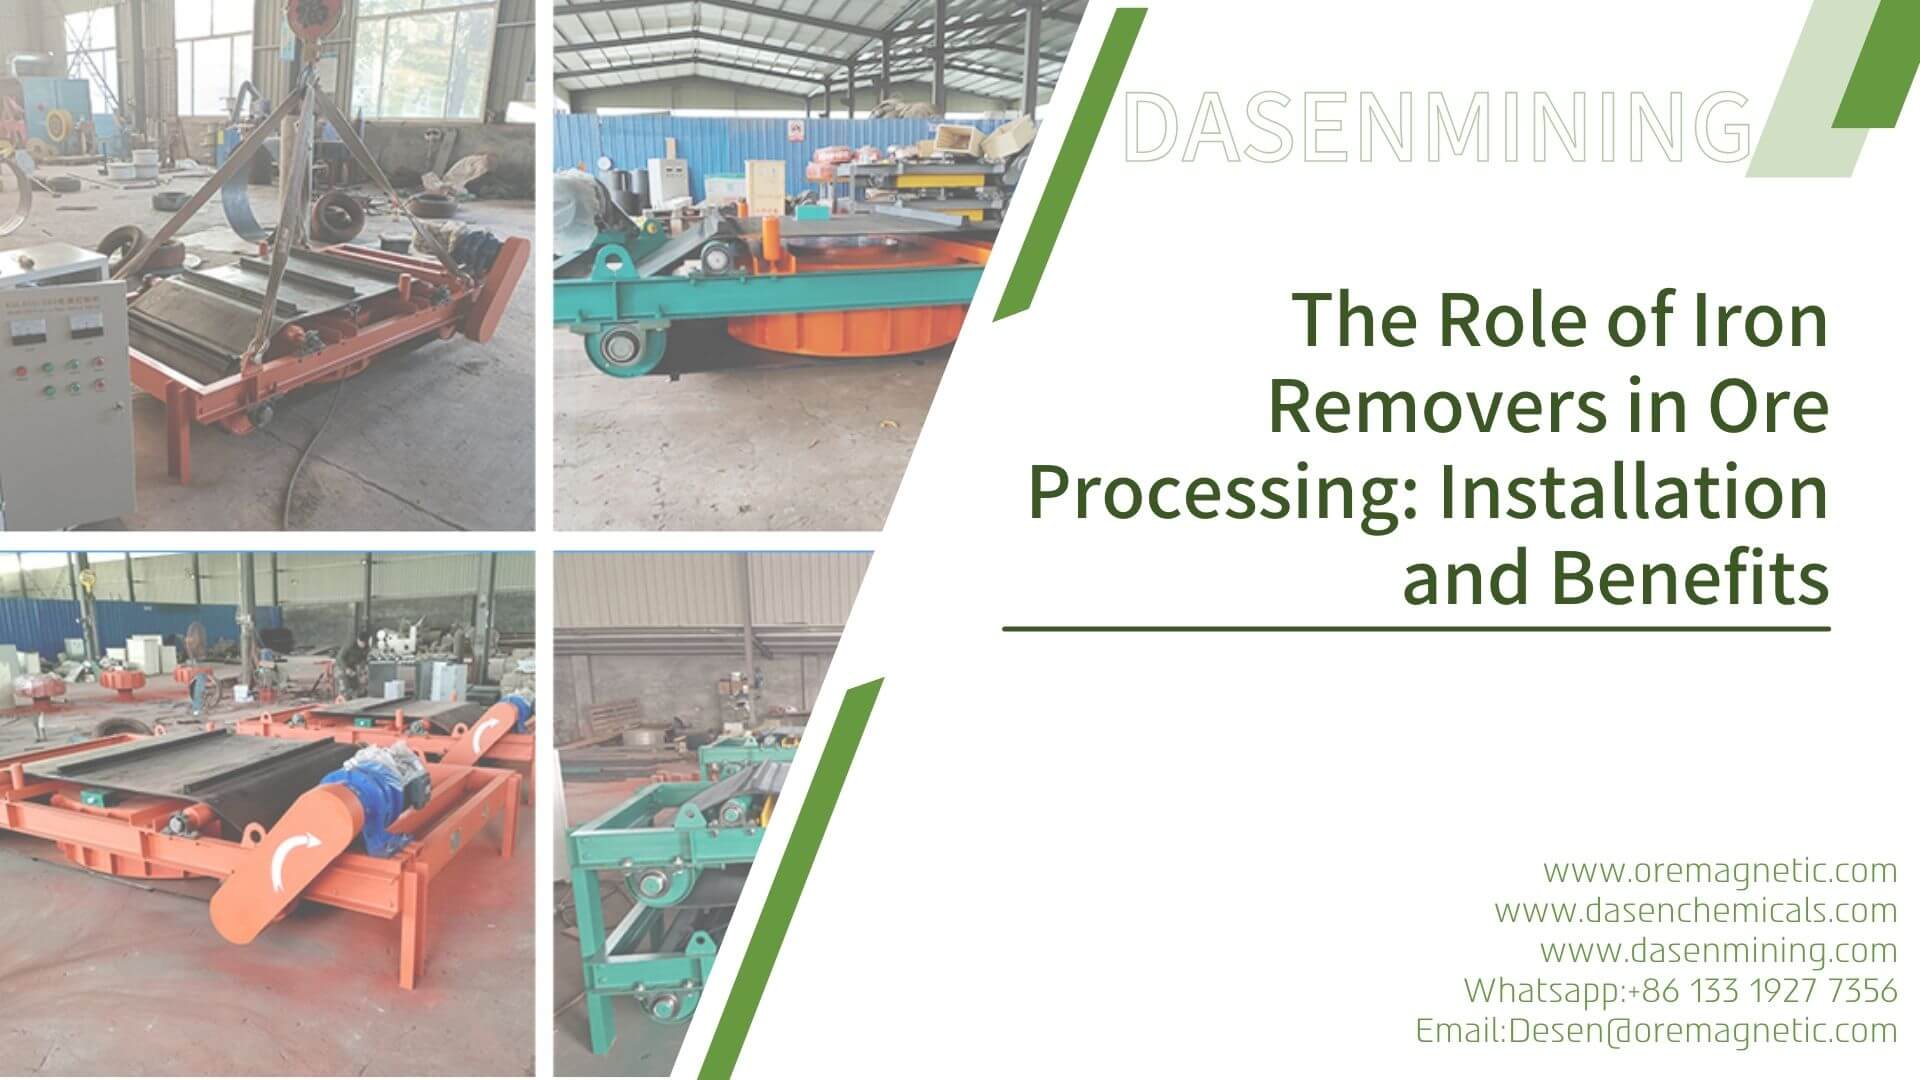 Iron Removers in Ore Processing - The Role of Iron Removers in Ore Processing: Installation and Benefits